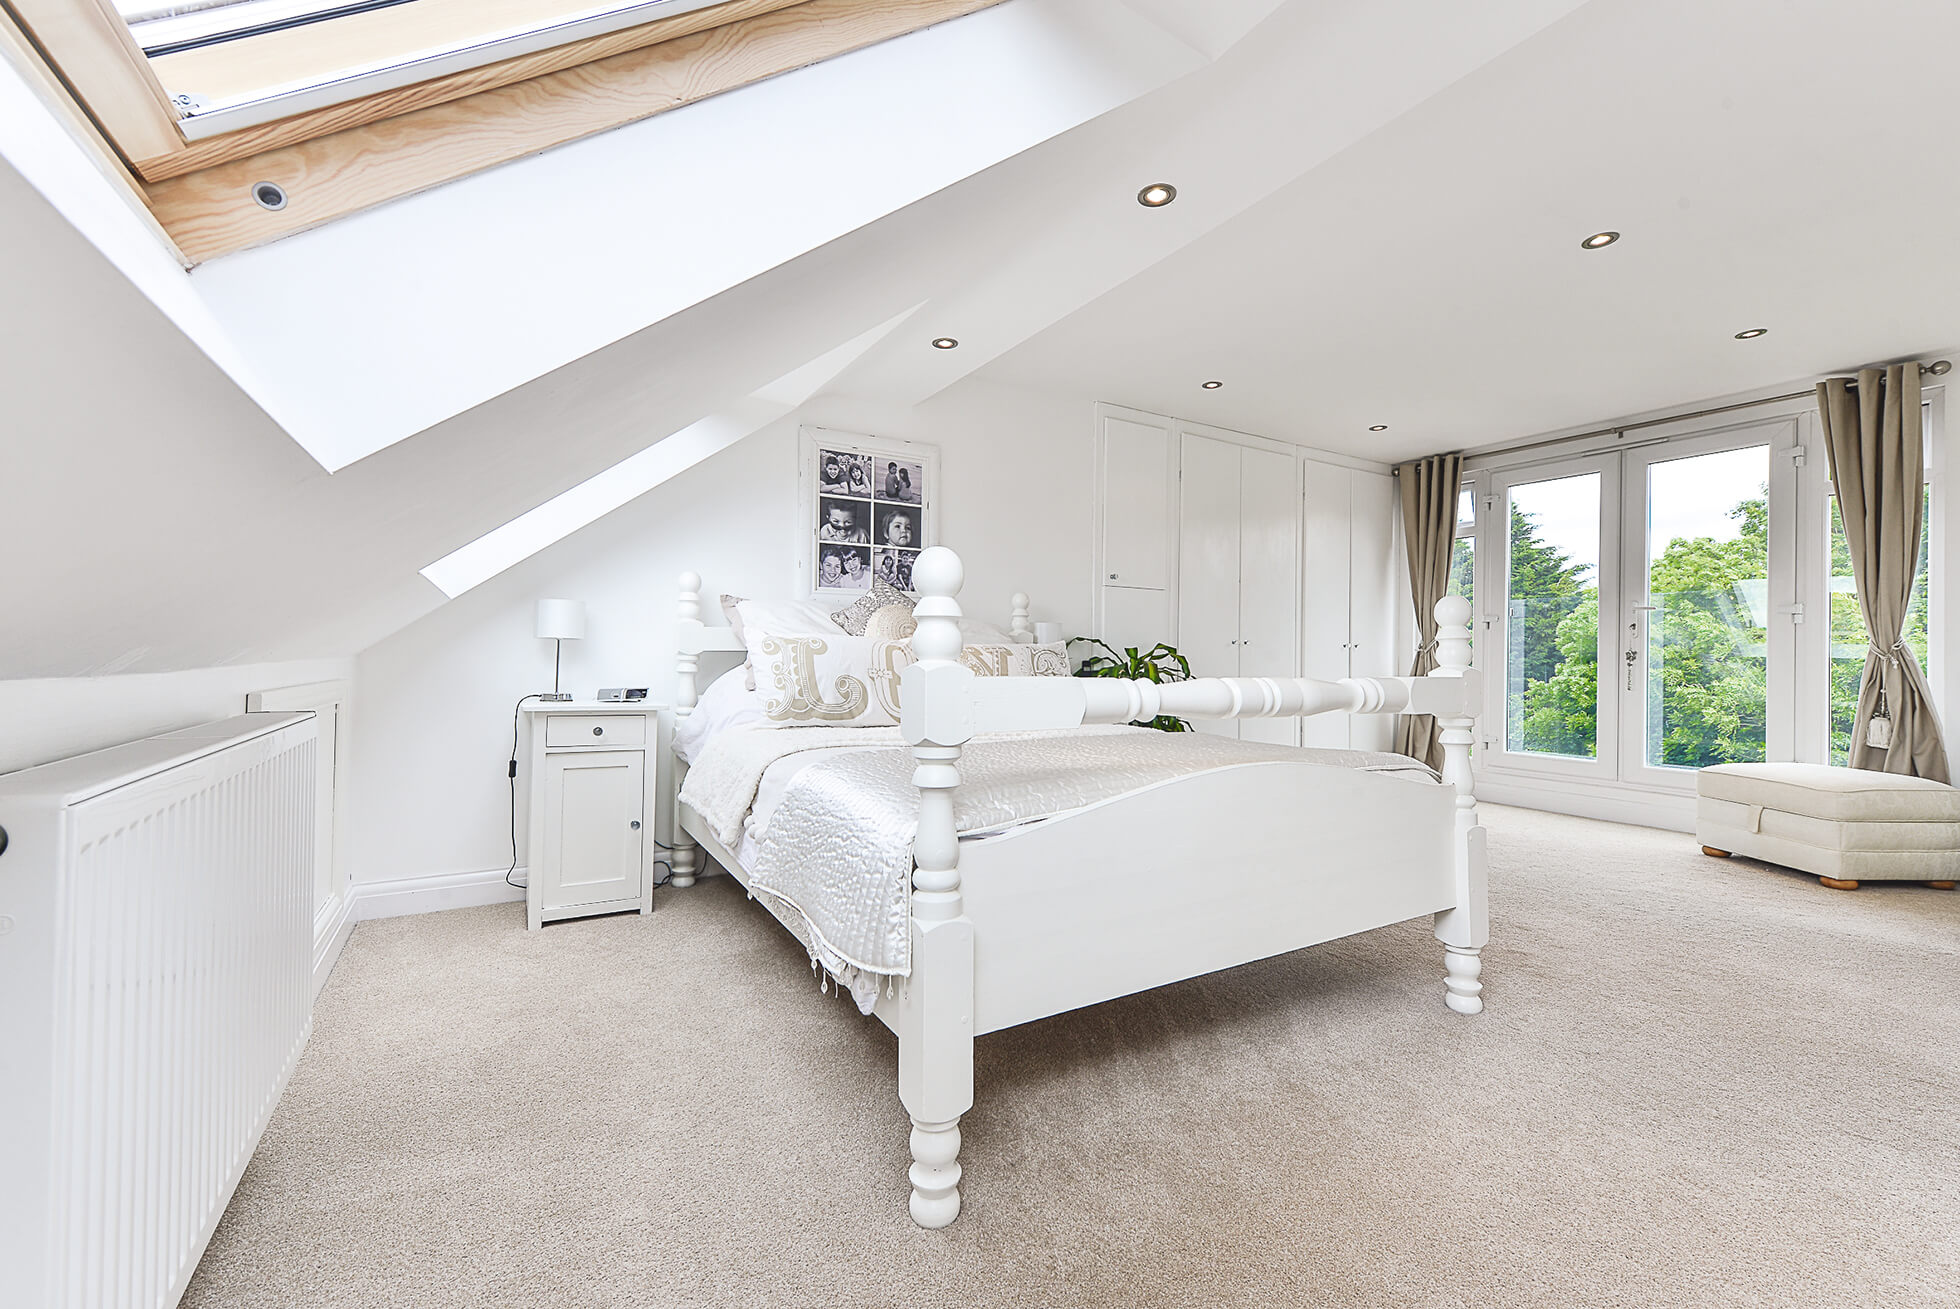 Do you have a question about converting your Loft in St Pauls Walden? Here are the most popular questions asked by our clients.